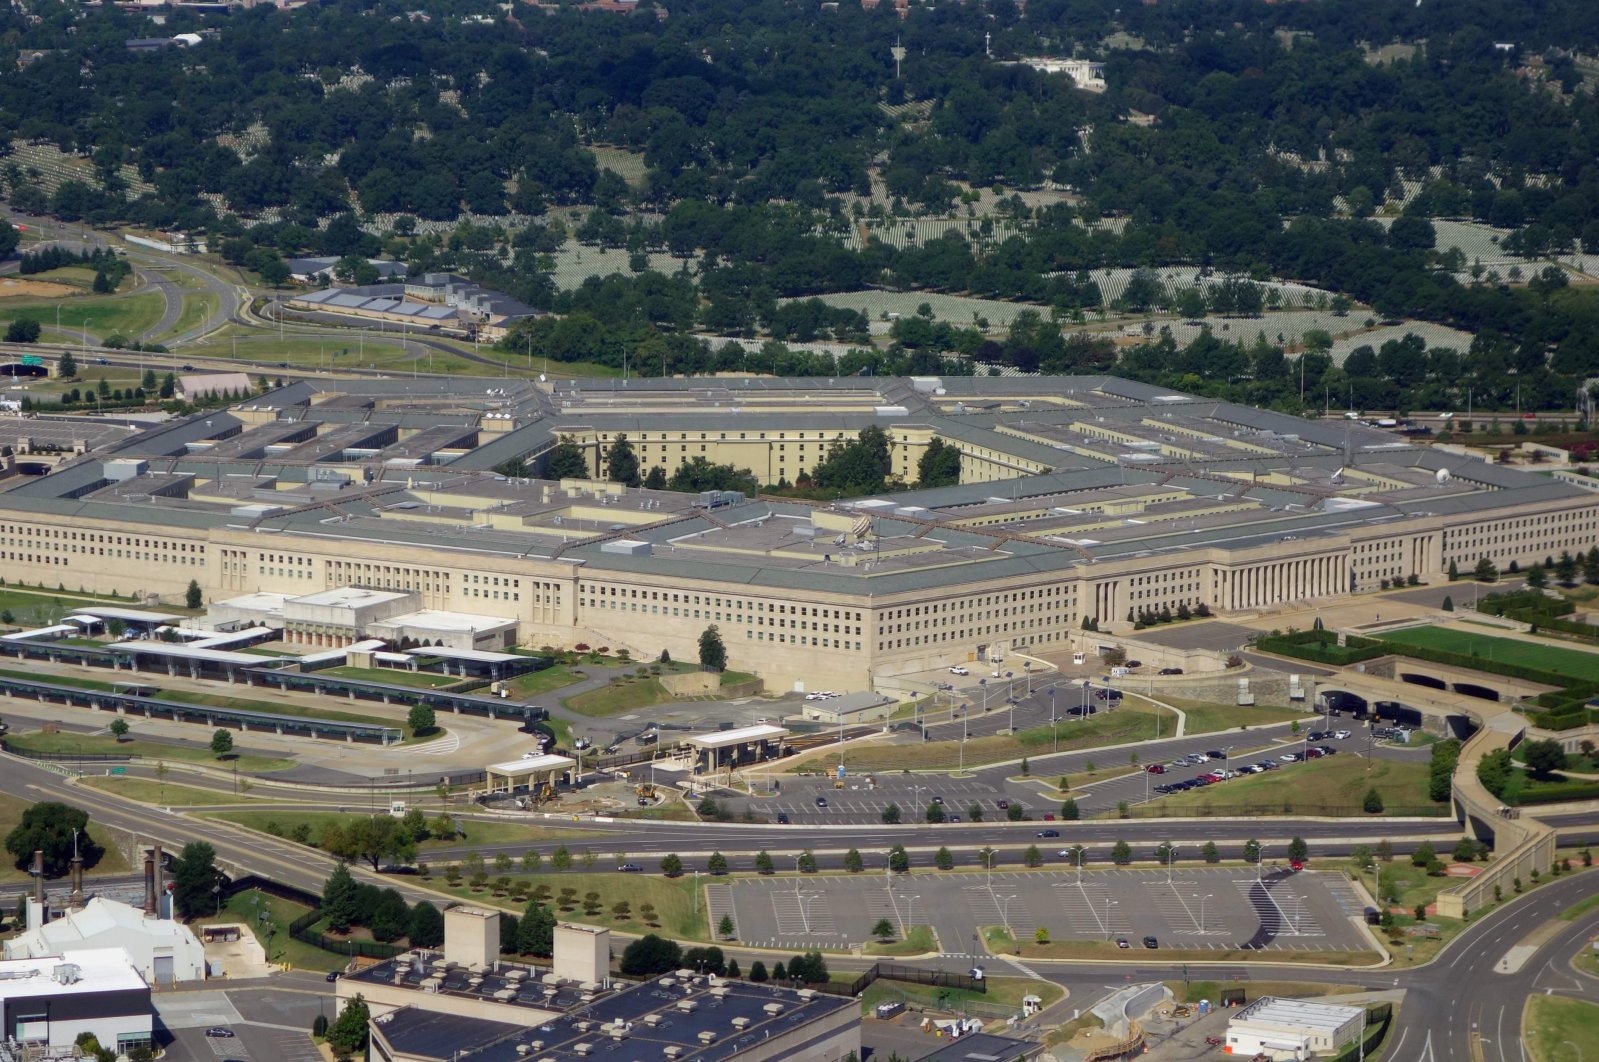 (FILES) In this file photo taken on August 25, 2013, The Pentagon is seen from the air over Washington, DC. - The US Defense Department announced on March 20, 2020, it has successfully tested an unarmed hypersonic missile, a weapon that could potentially overwhelm an adversary's defense systems. The Pentagon said a test missile flew at hypersonic speeds -- more than five times the speed of sound, or Mach 5 -- to a designated impact point. (Photo by SAUL LOEB / AFP)